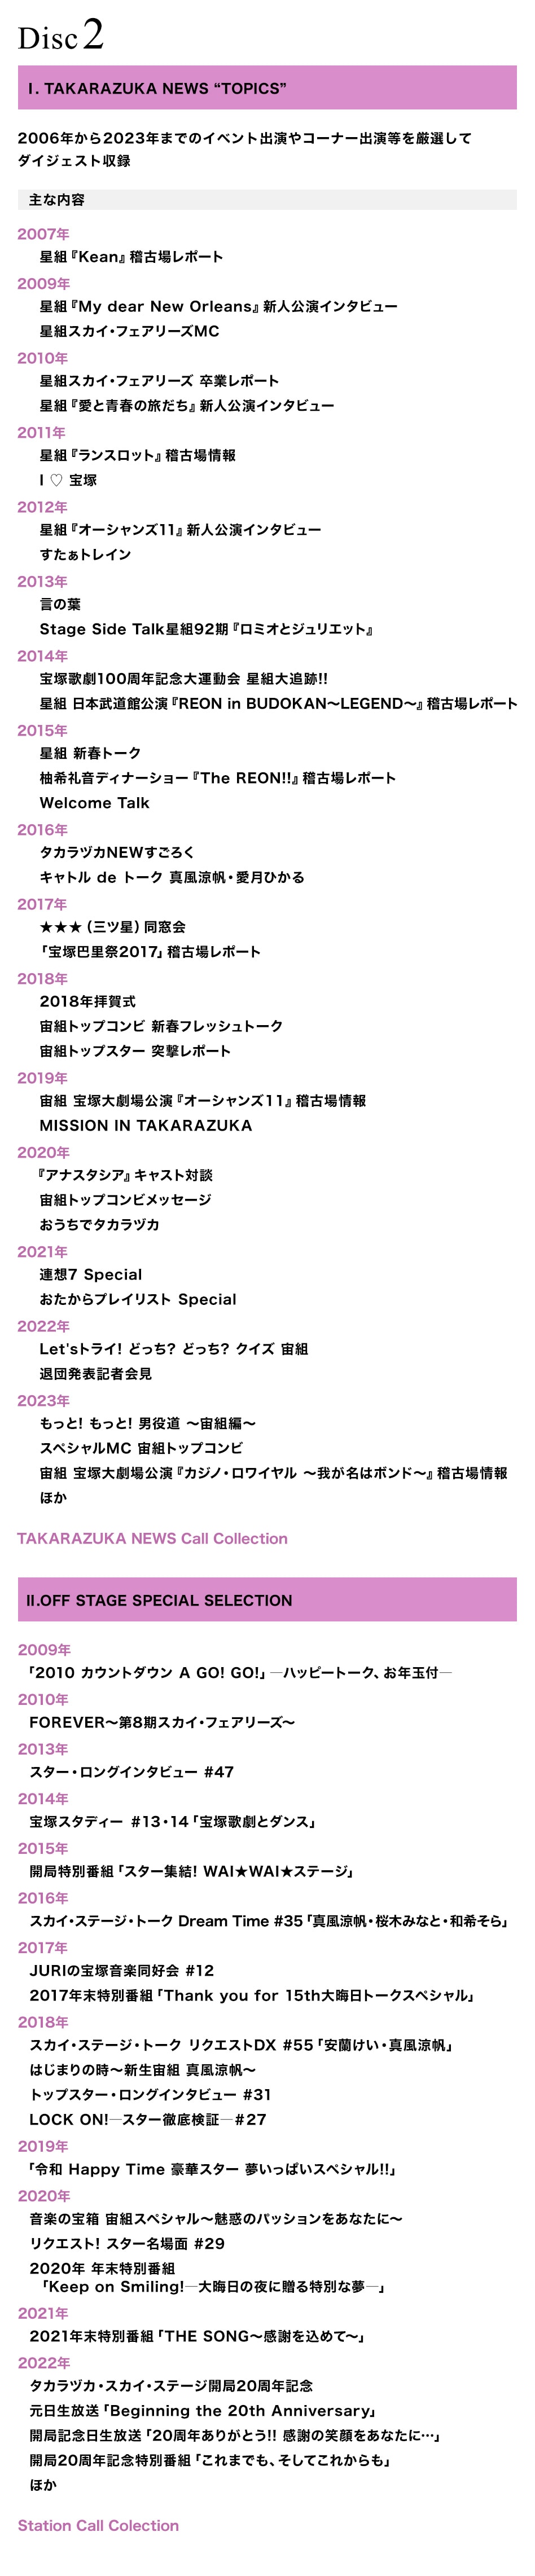 Disc2　1.TAKARAZUKA NEWS “TOPICS”／2.OFF STAGE SPECIAL SELECTION